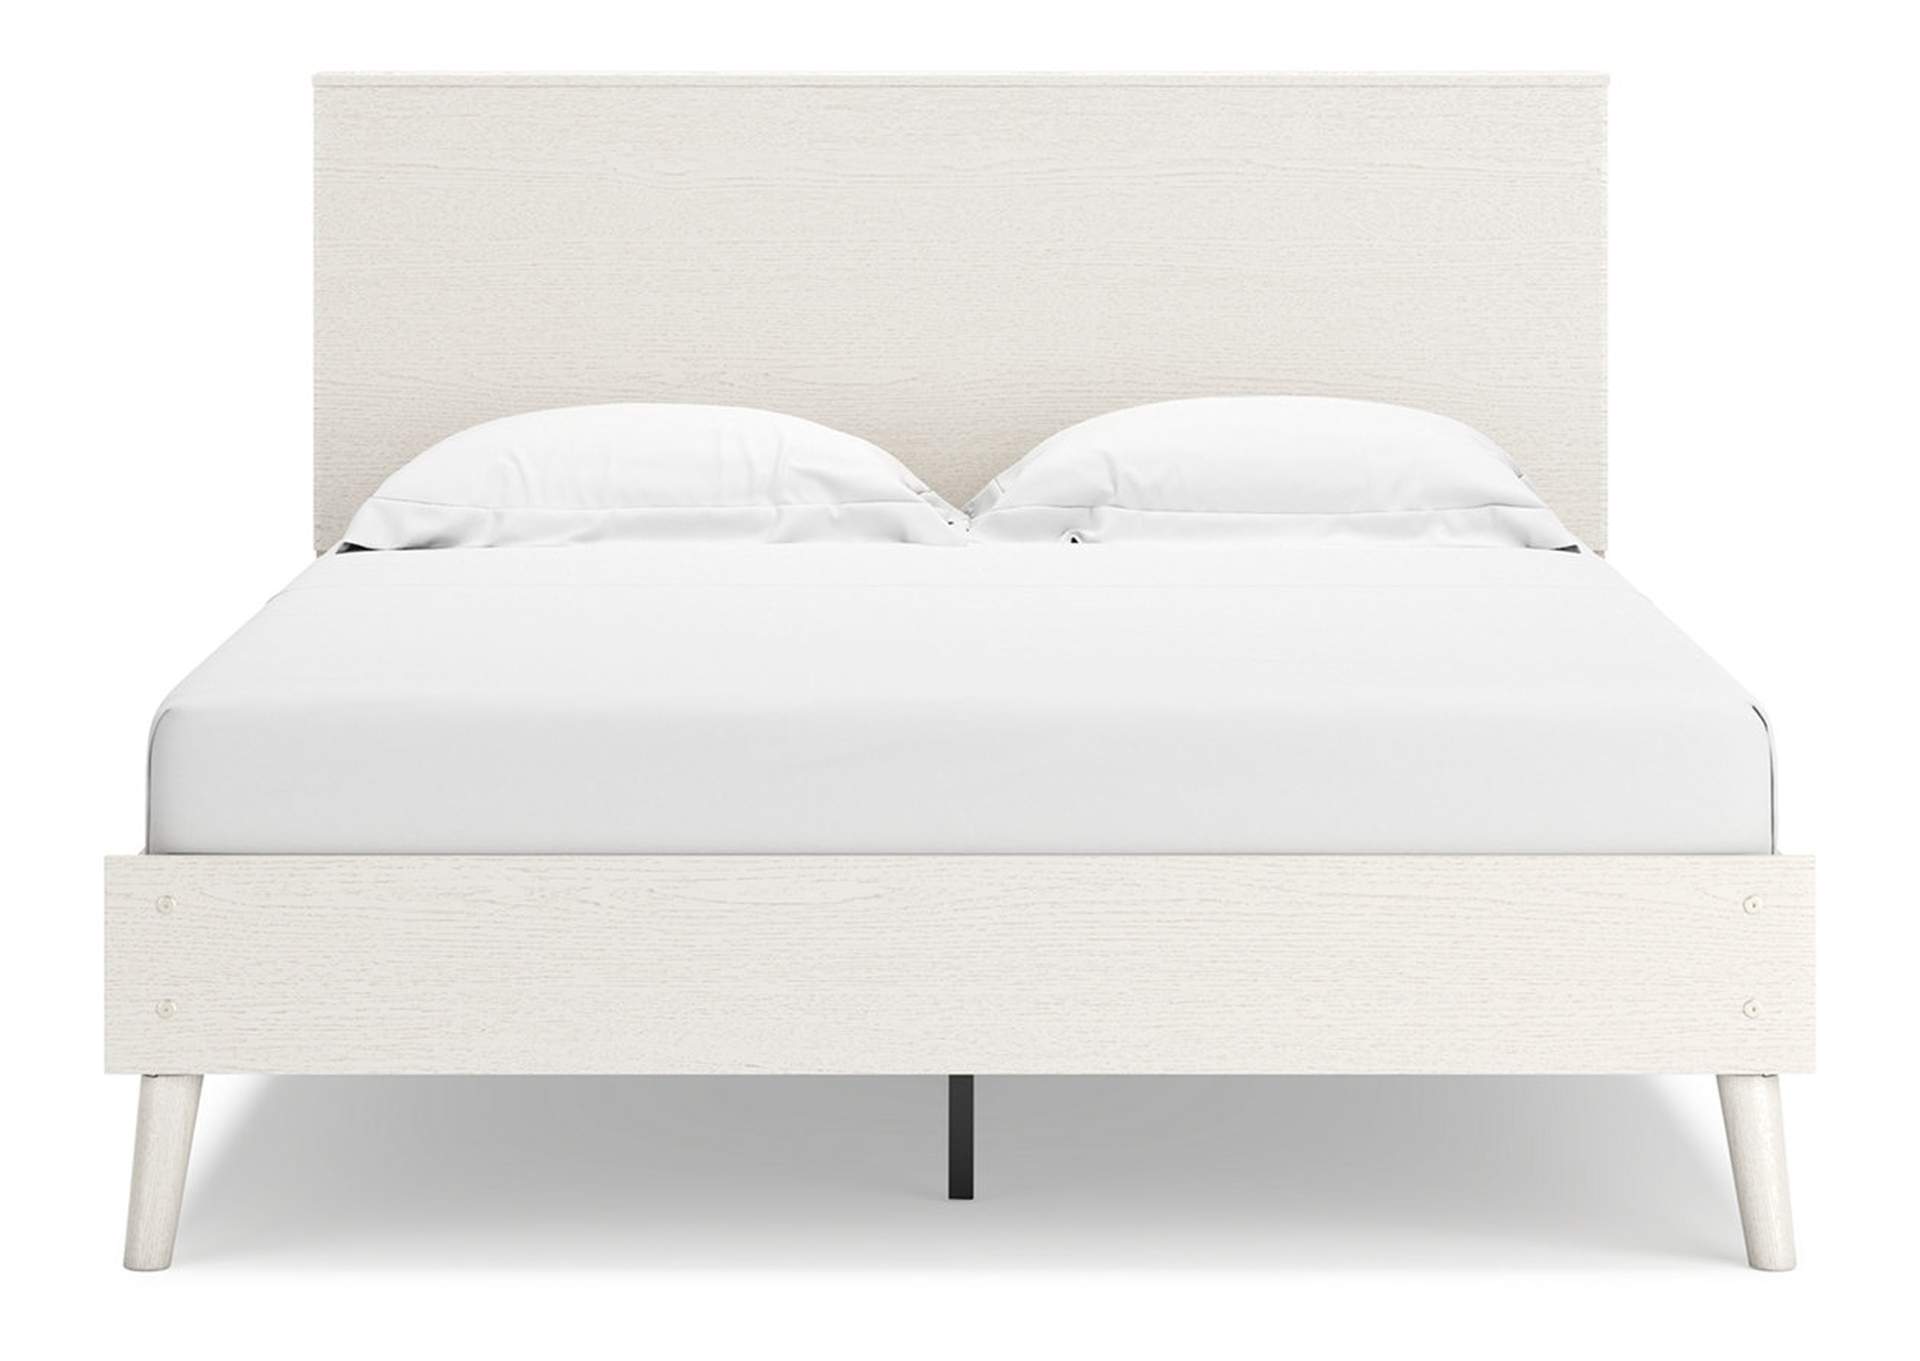 Aprilyn Queen Bookcase Bed,Signature Design By Ashley